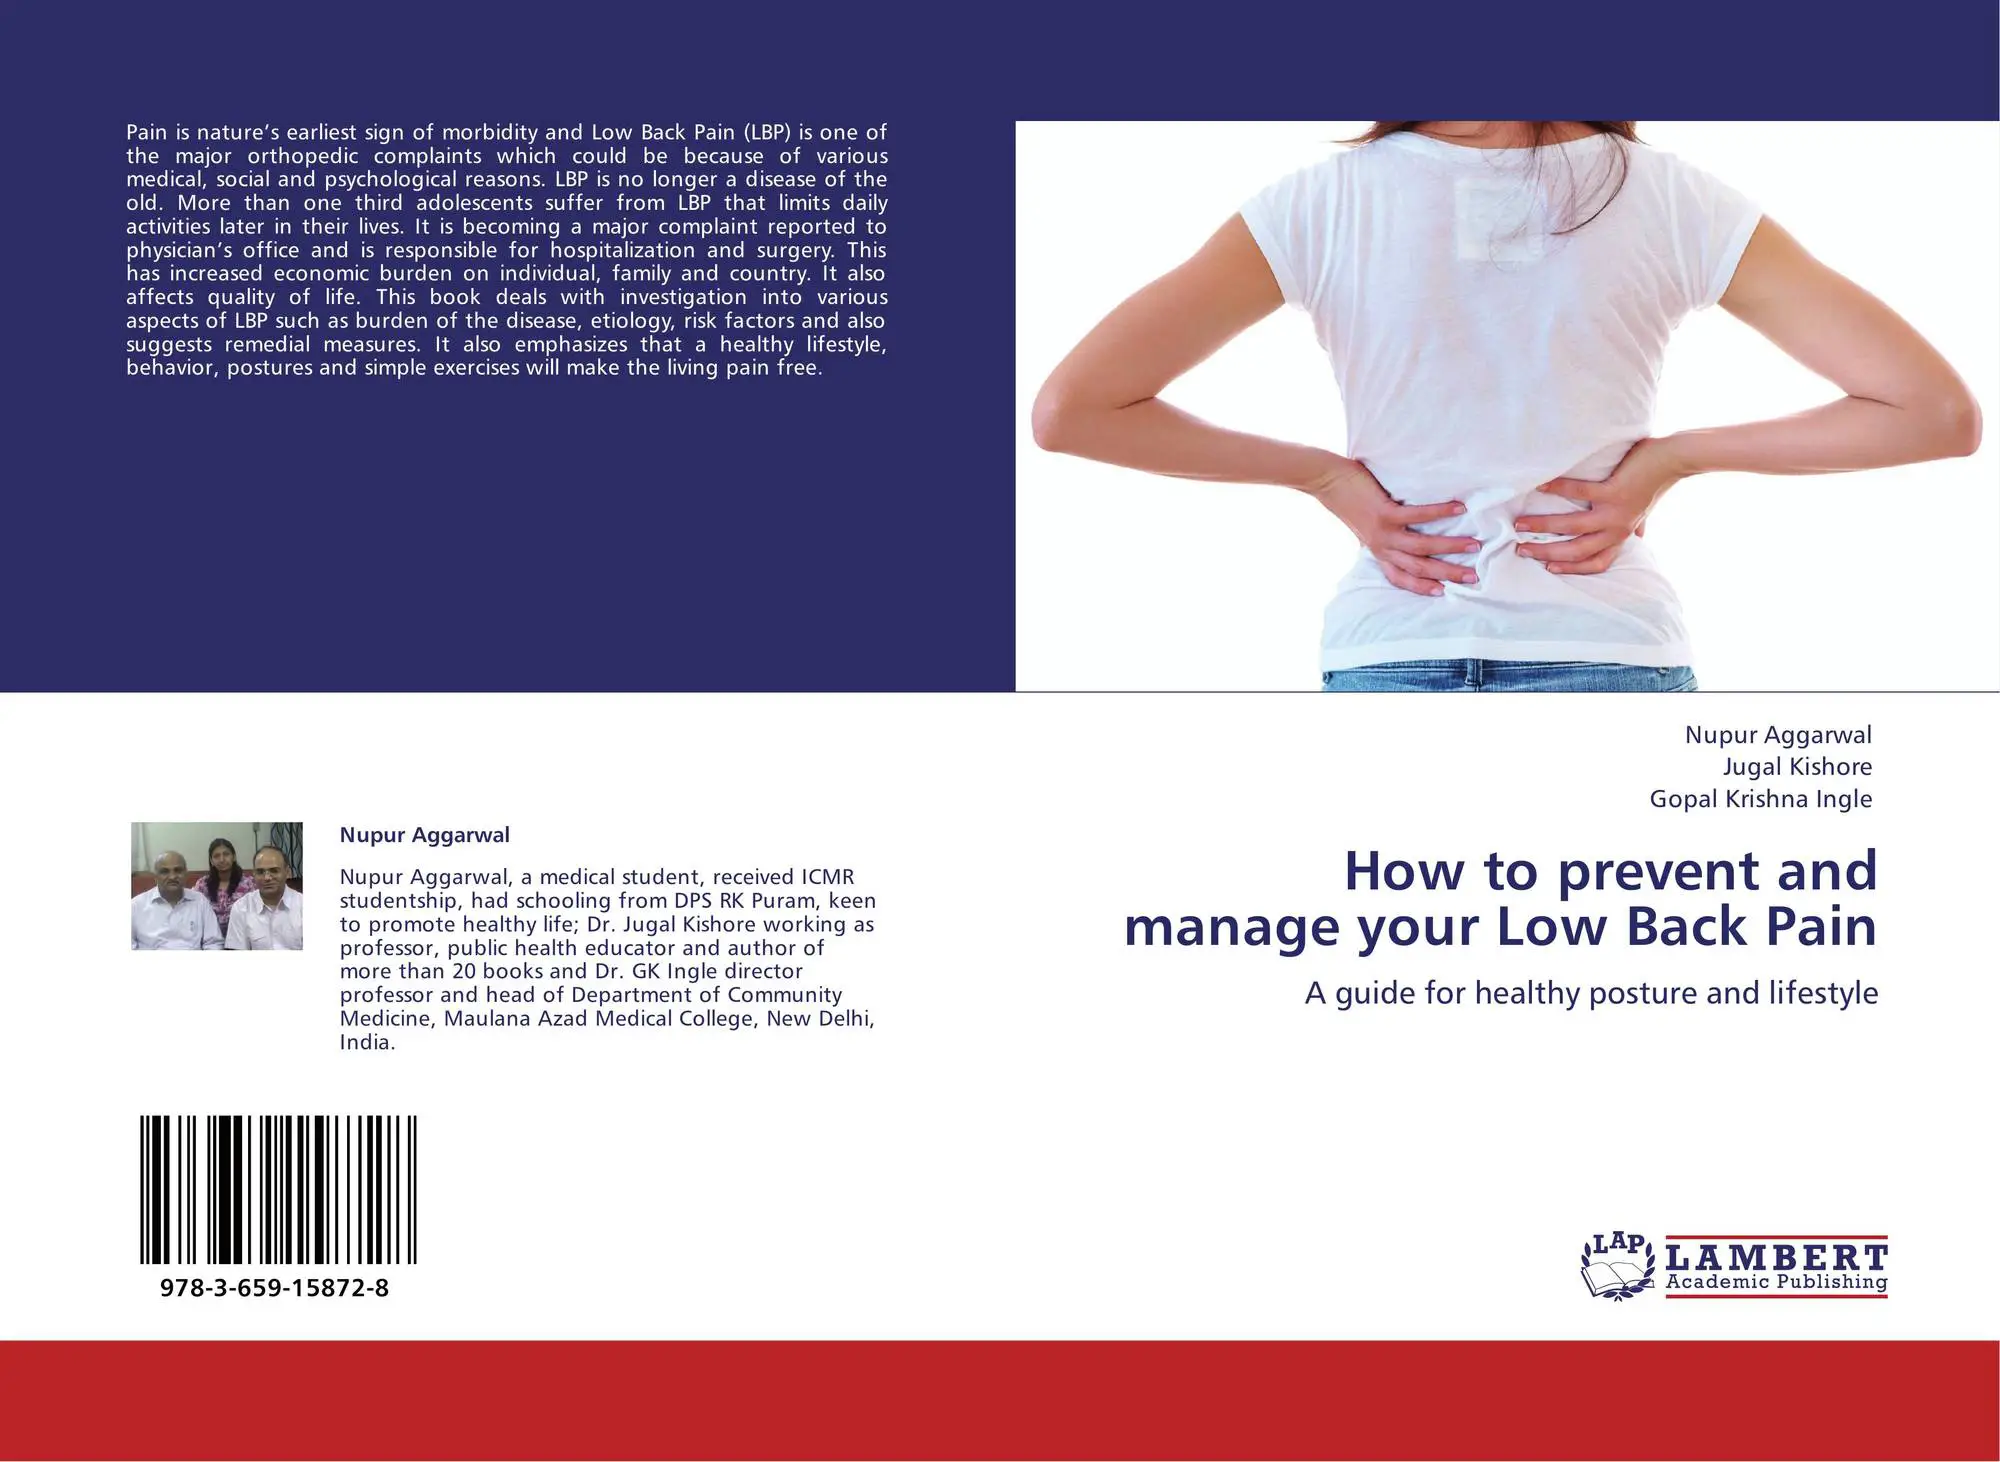 How to prevent and manage your Low Back Pain, 978